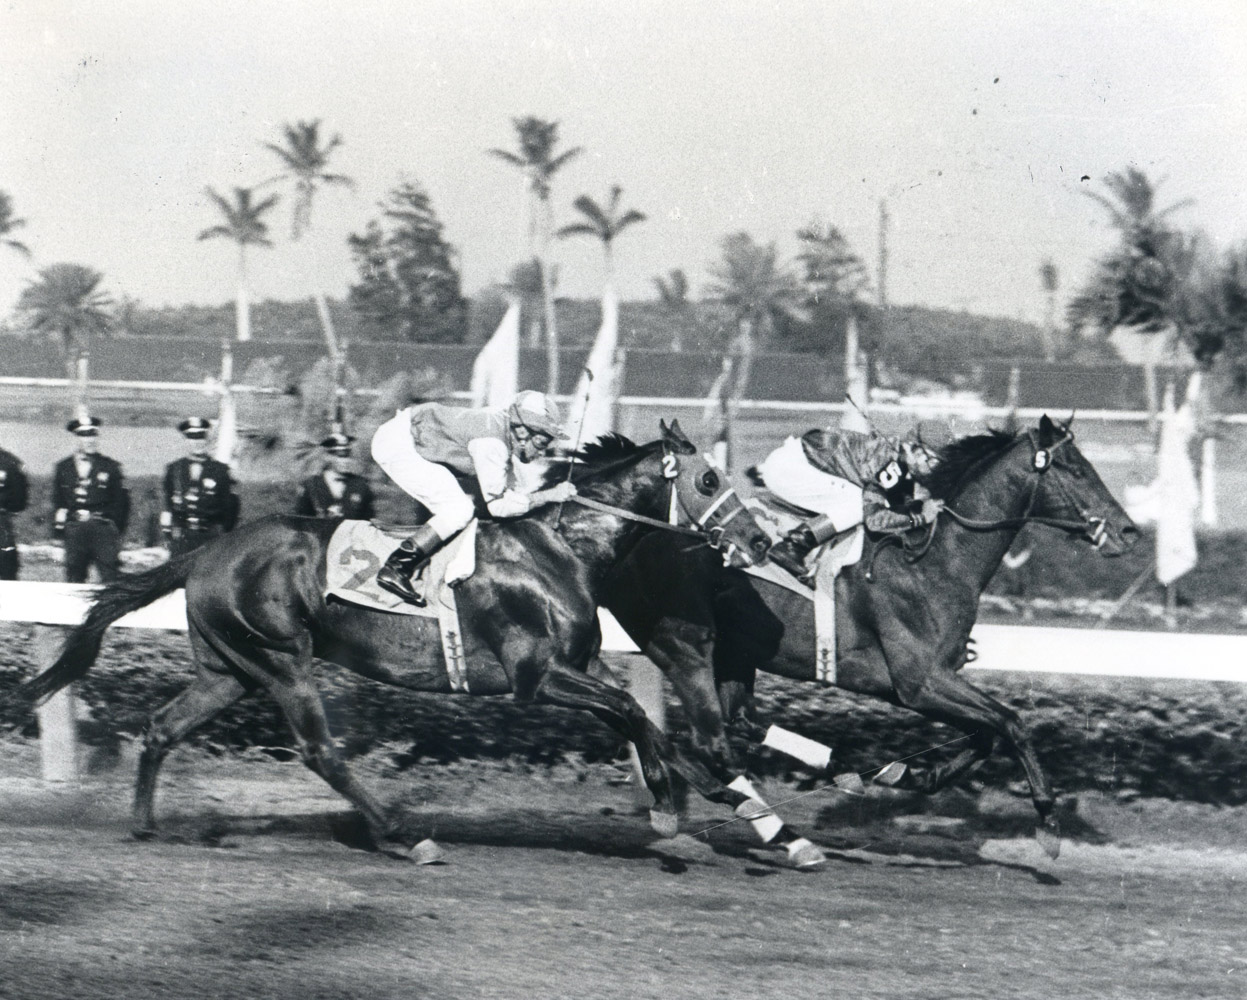 Tim Tam (Bill Hartack up) winning the 1958 Florida Derby at Gulfstream Park (Jim Raftery Turfotos/Museum Collection)